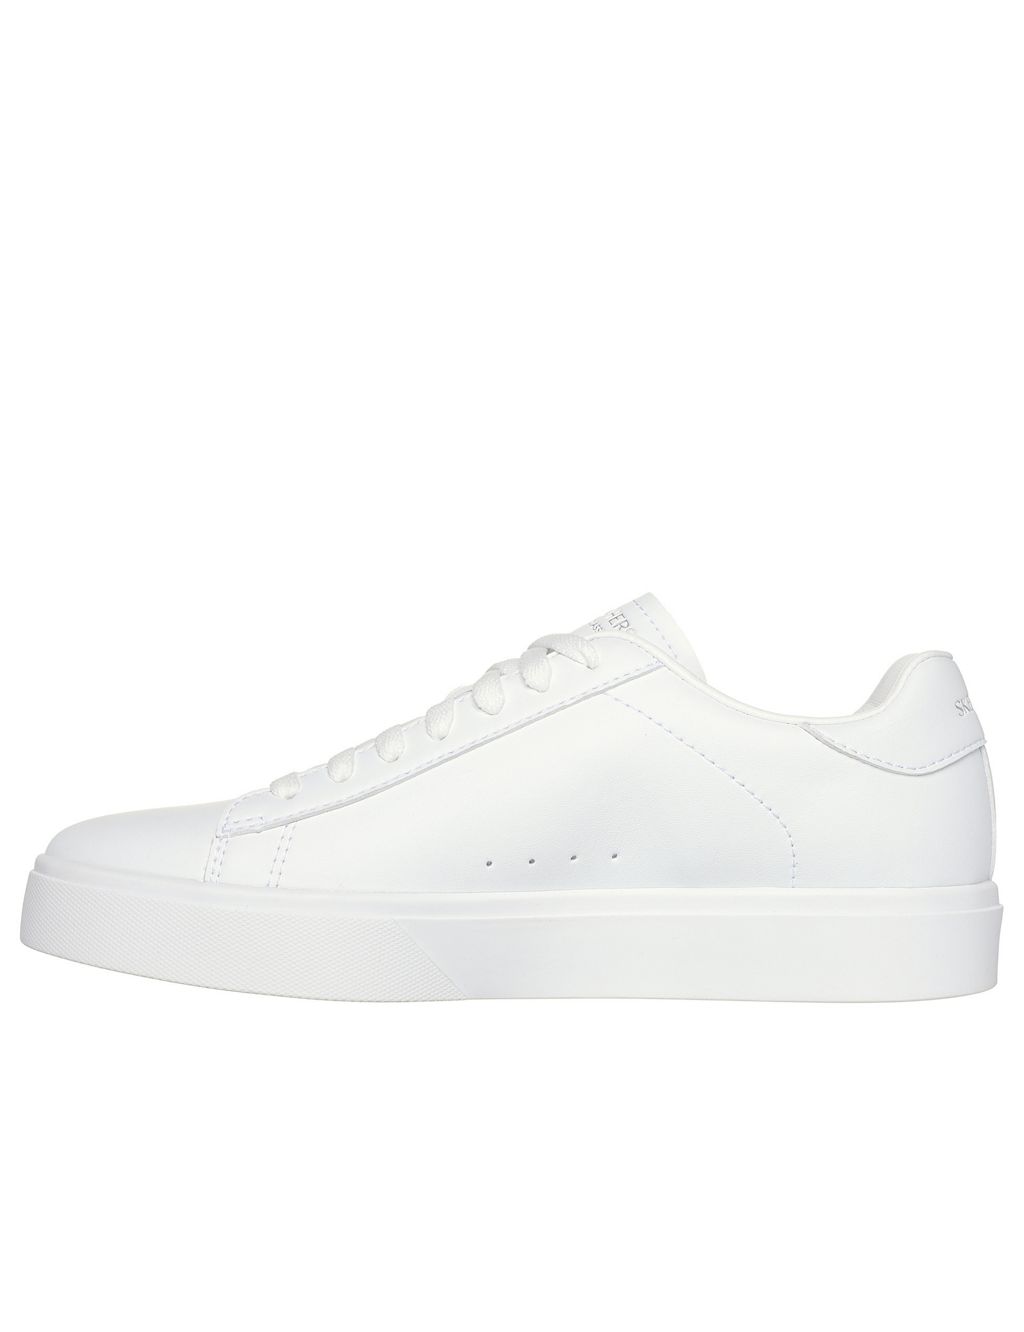 Eden LX Top Grade Lace Up Trainers 2 of 5